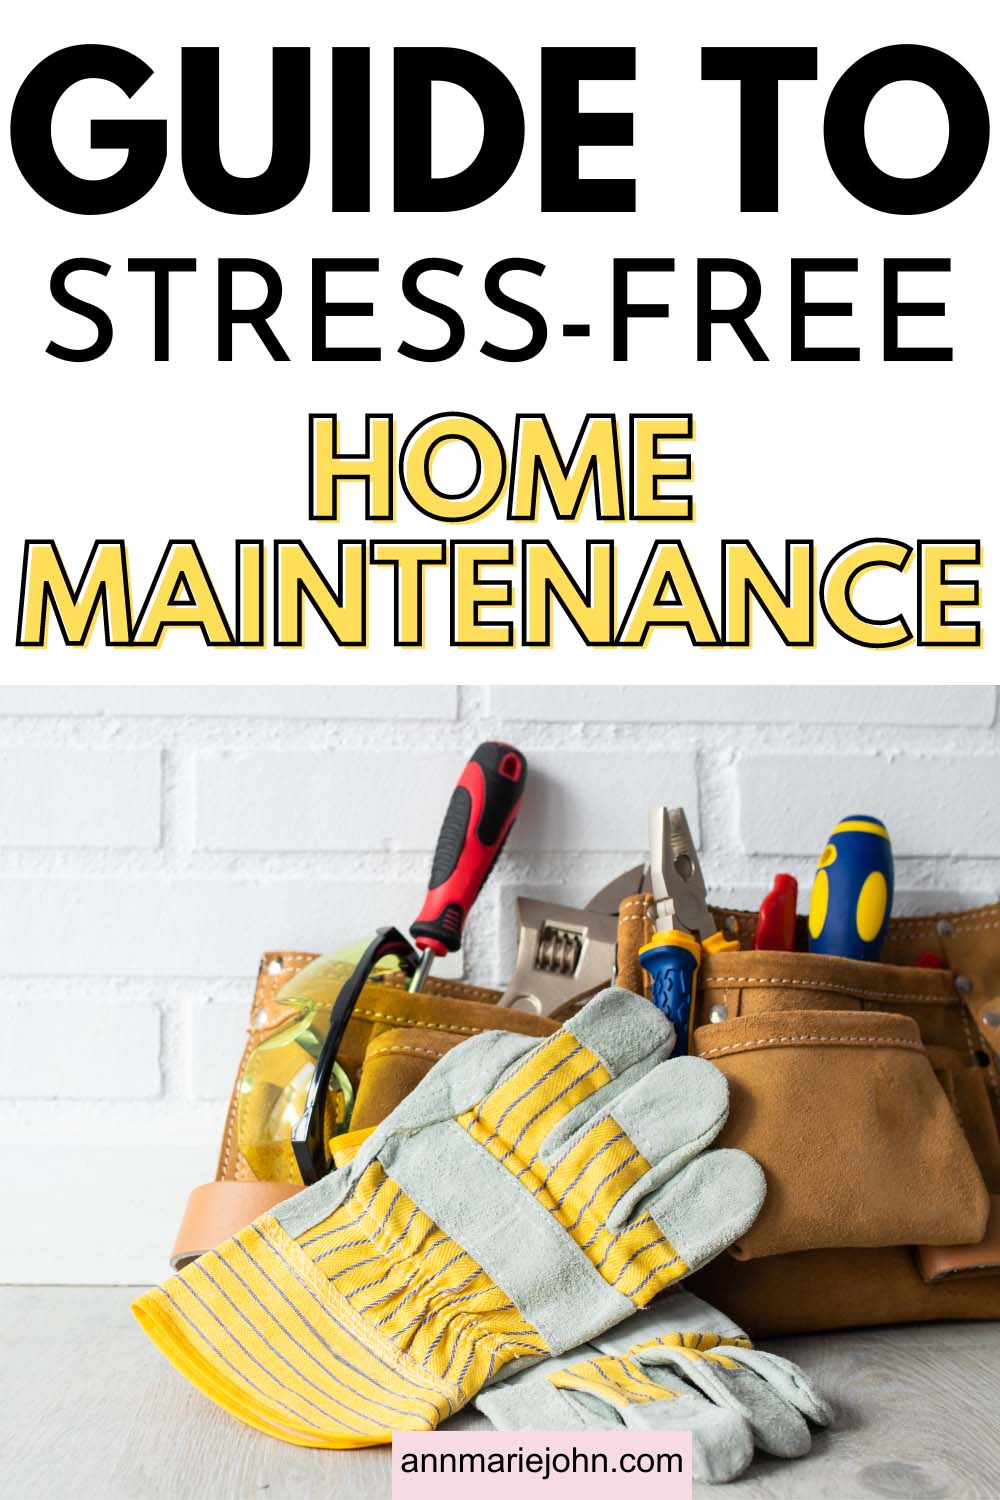 Guide To Stress-Free Home Maintenance